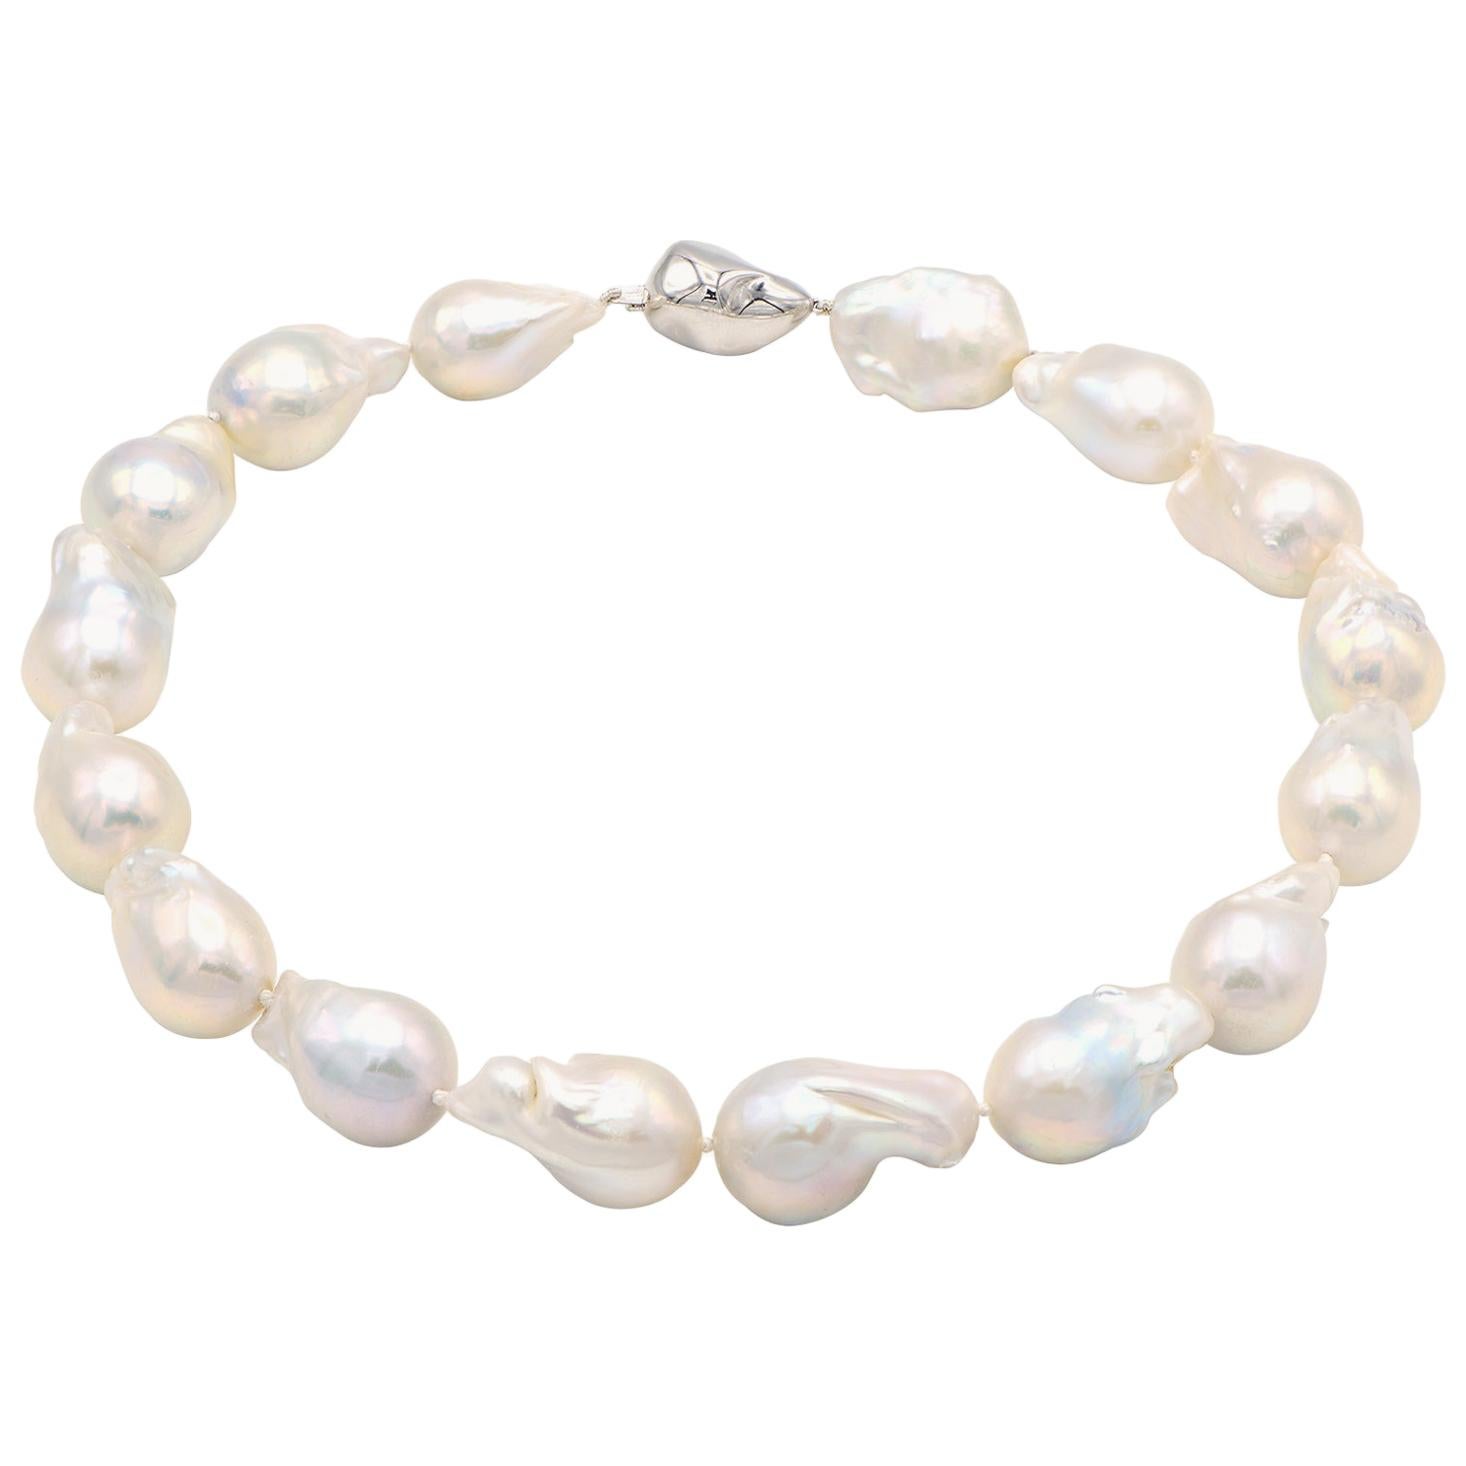 Baroque White Freshwater Pearl Necklace with 14 Karat White Gold Clasp For Sale